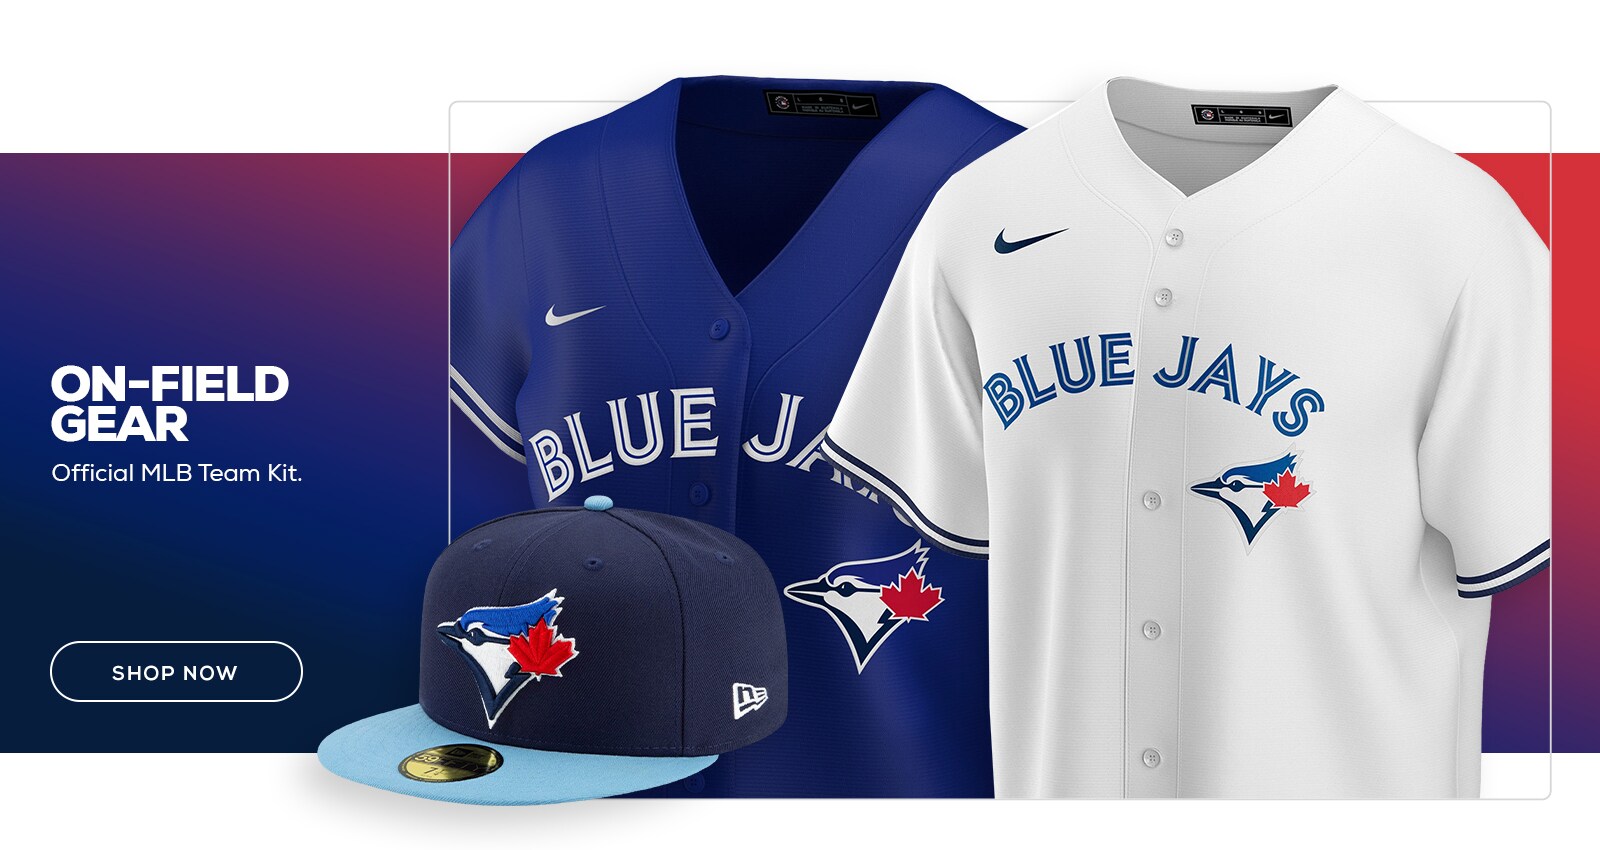 ON-FIELD GEAR Official MLB Team Kit. Shop Now